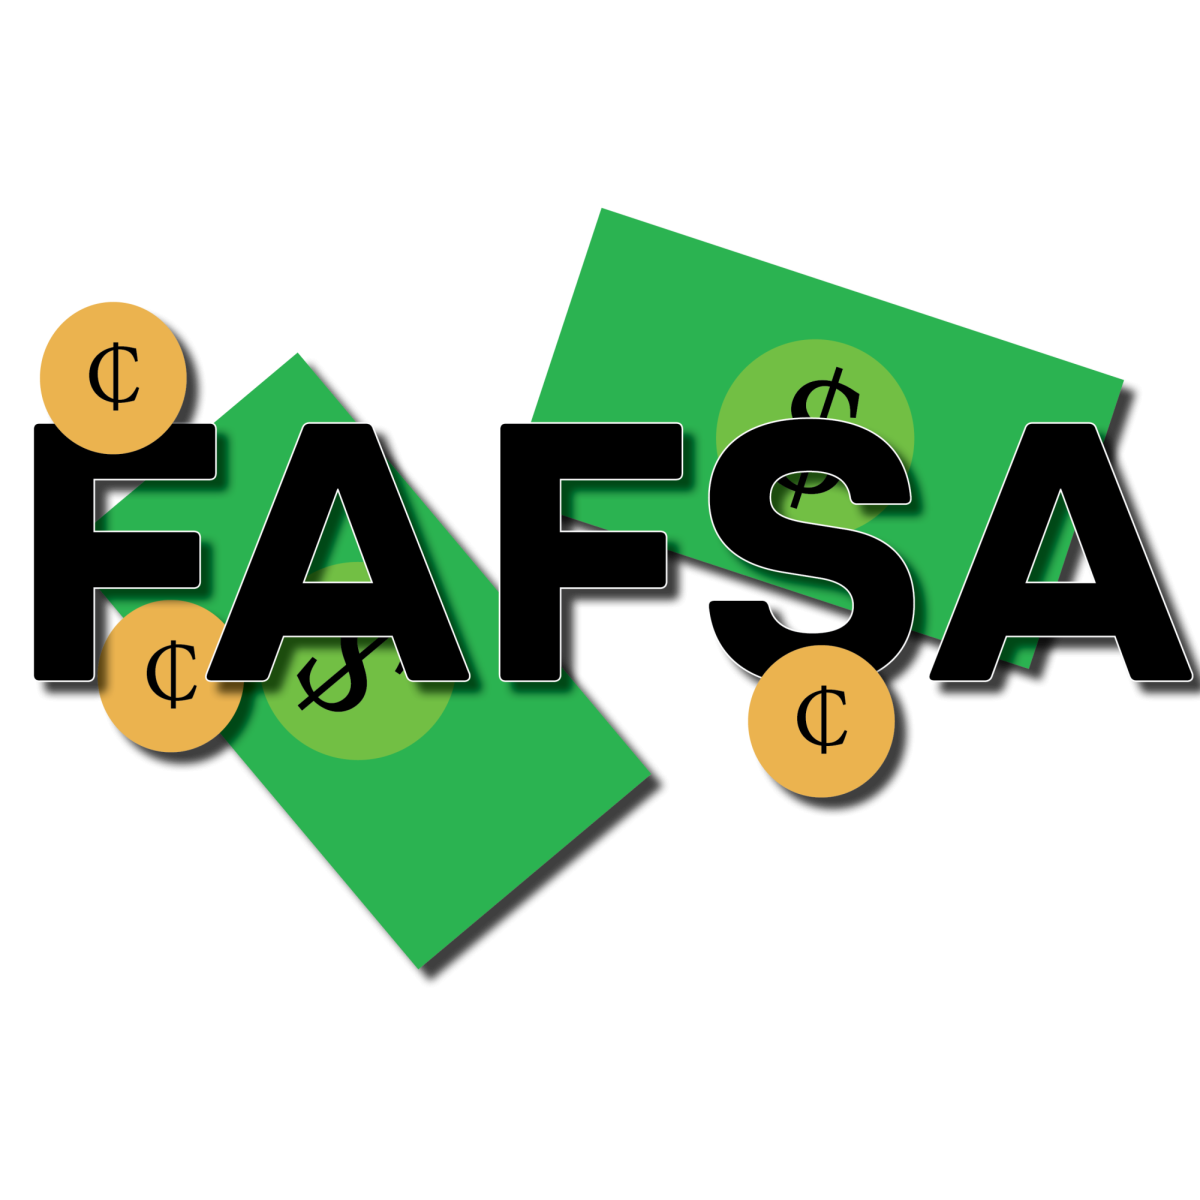 FAFSA+now+open+to+students%3A+With+immense+patience%2C+students+have+been+waiting+for+the+chance+to+fill+out+the+FAFSA.+Now%2C+the+form+is+officially+available+to+all+students+across+the+country